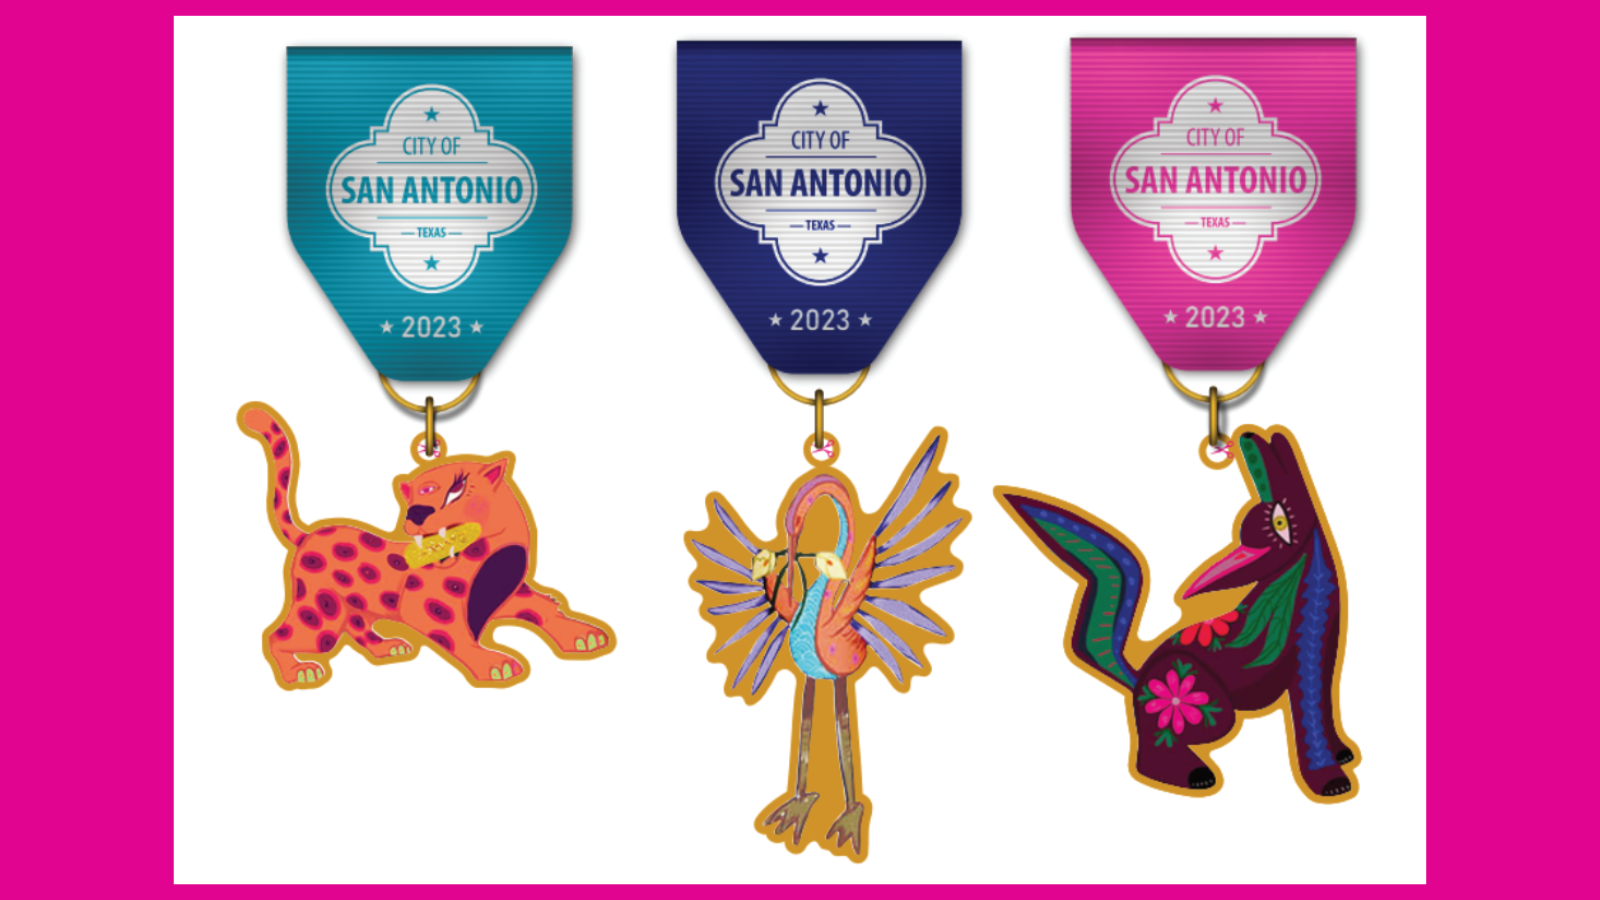 Gallery 2 - Event 2023 Official City of San Antonio Fiesta Medal Giveaways